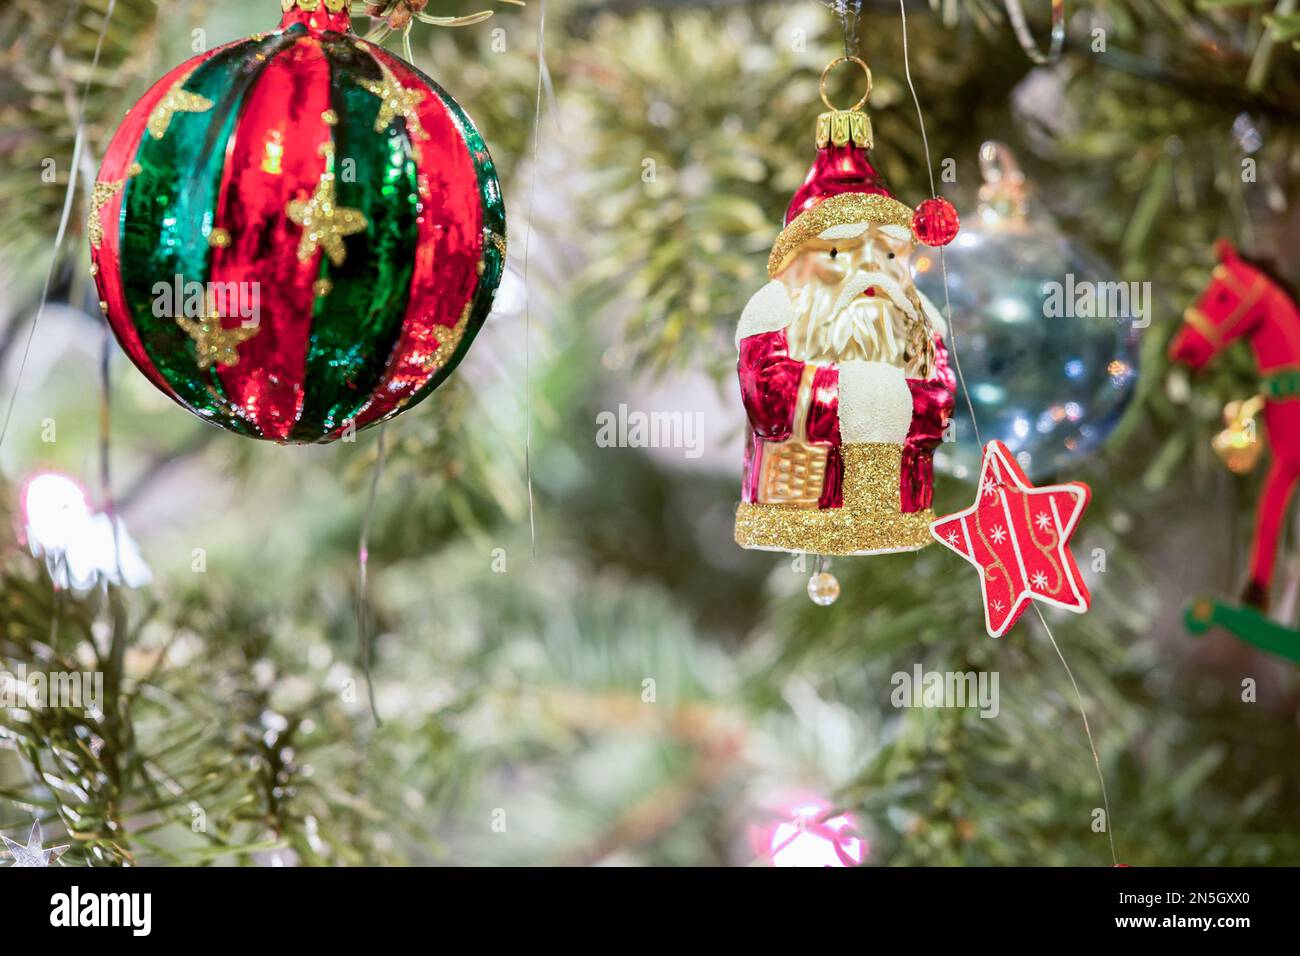 Christmas baubles and snowman hanging on Christmas tree, Munich, Germany Stock Photo